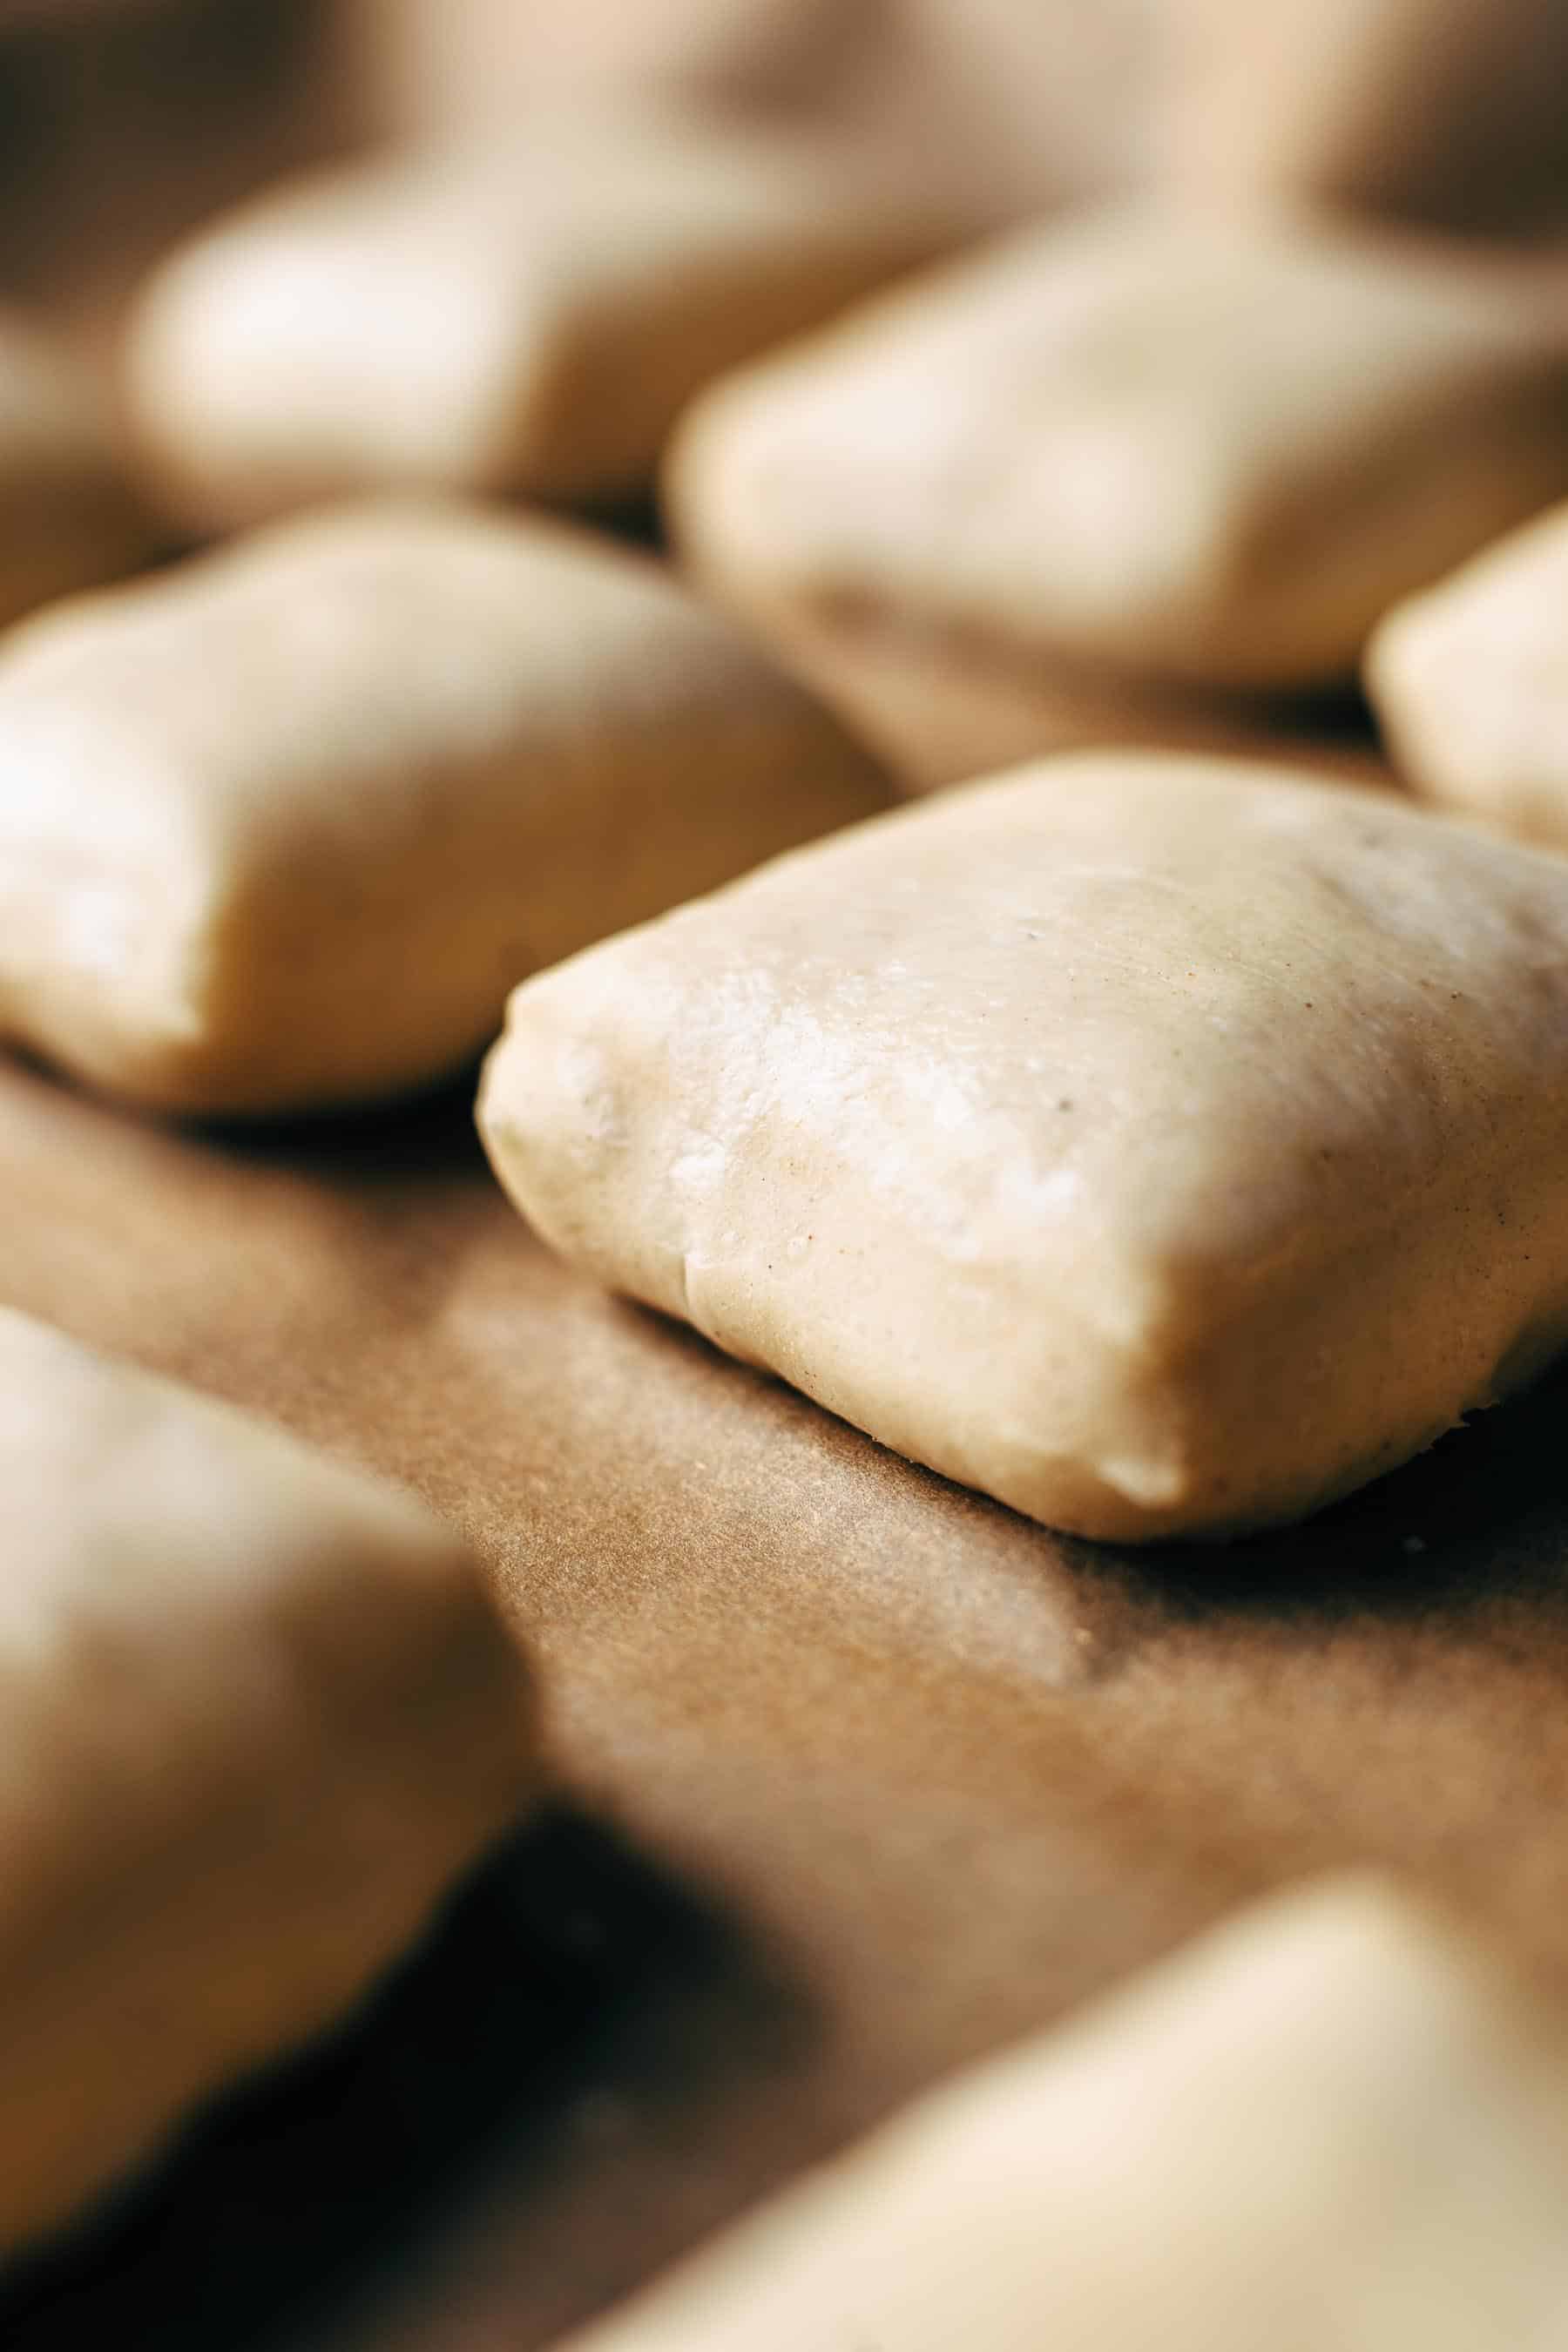 Proofed pieces of yeast dough on a parchment paper layered baking sheet